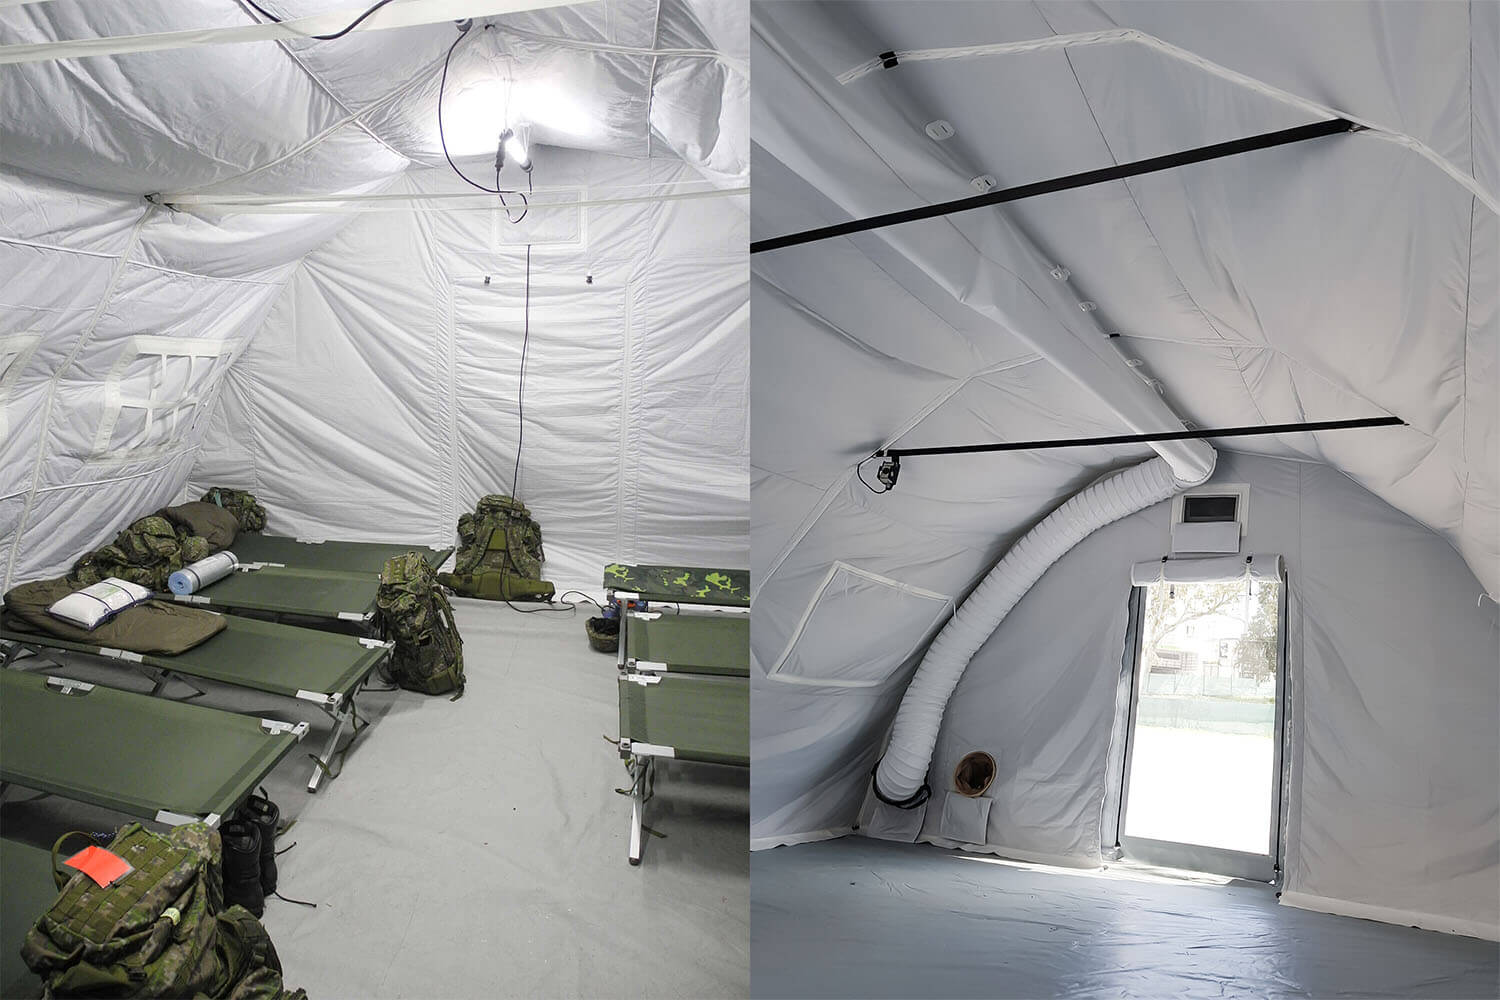 Interior of the rapid deploy heavy duty Nixus PRO inflatable military tent